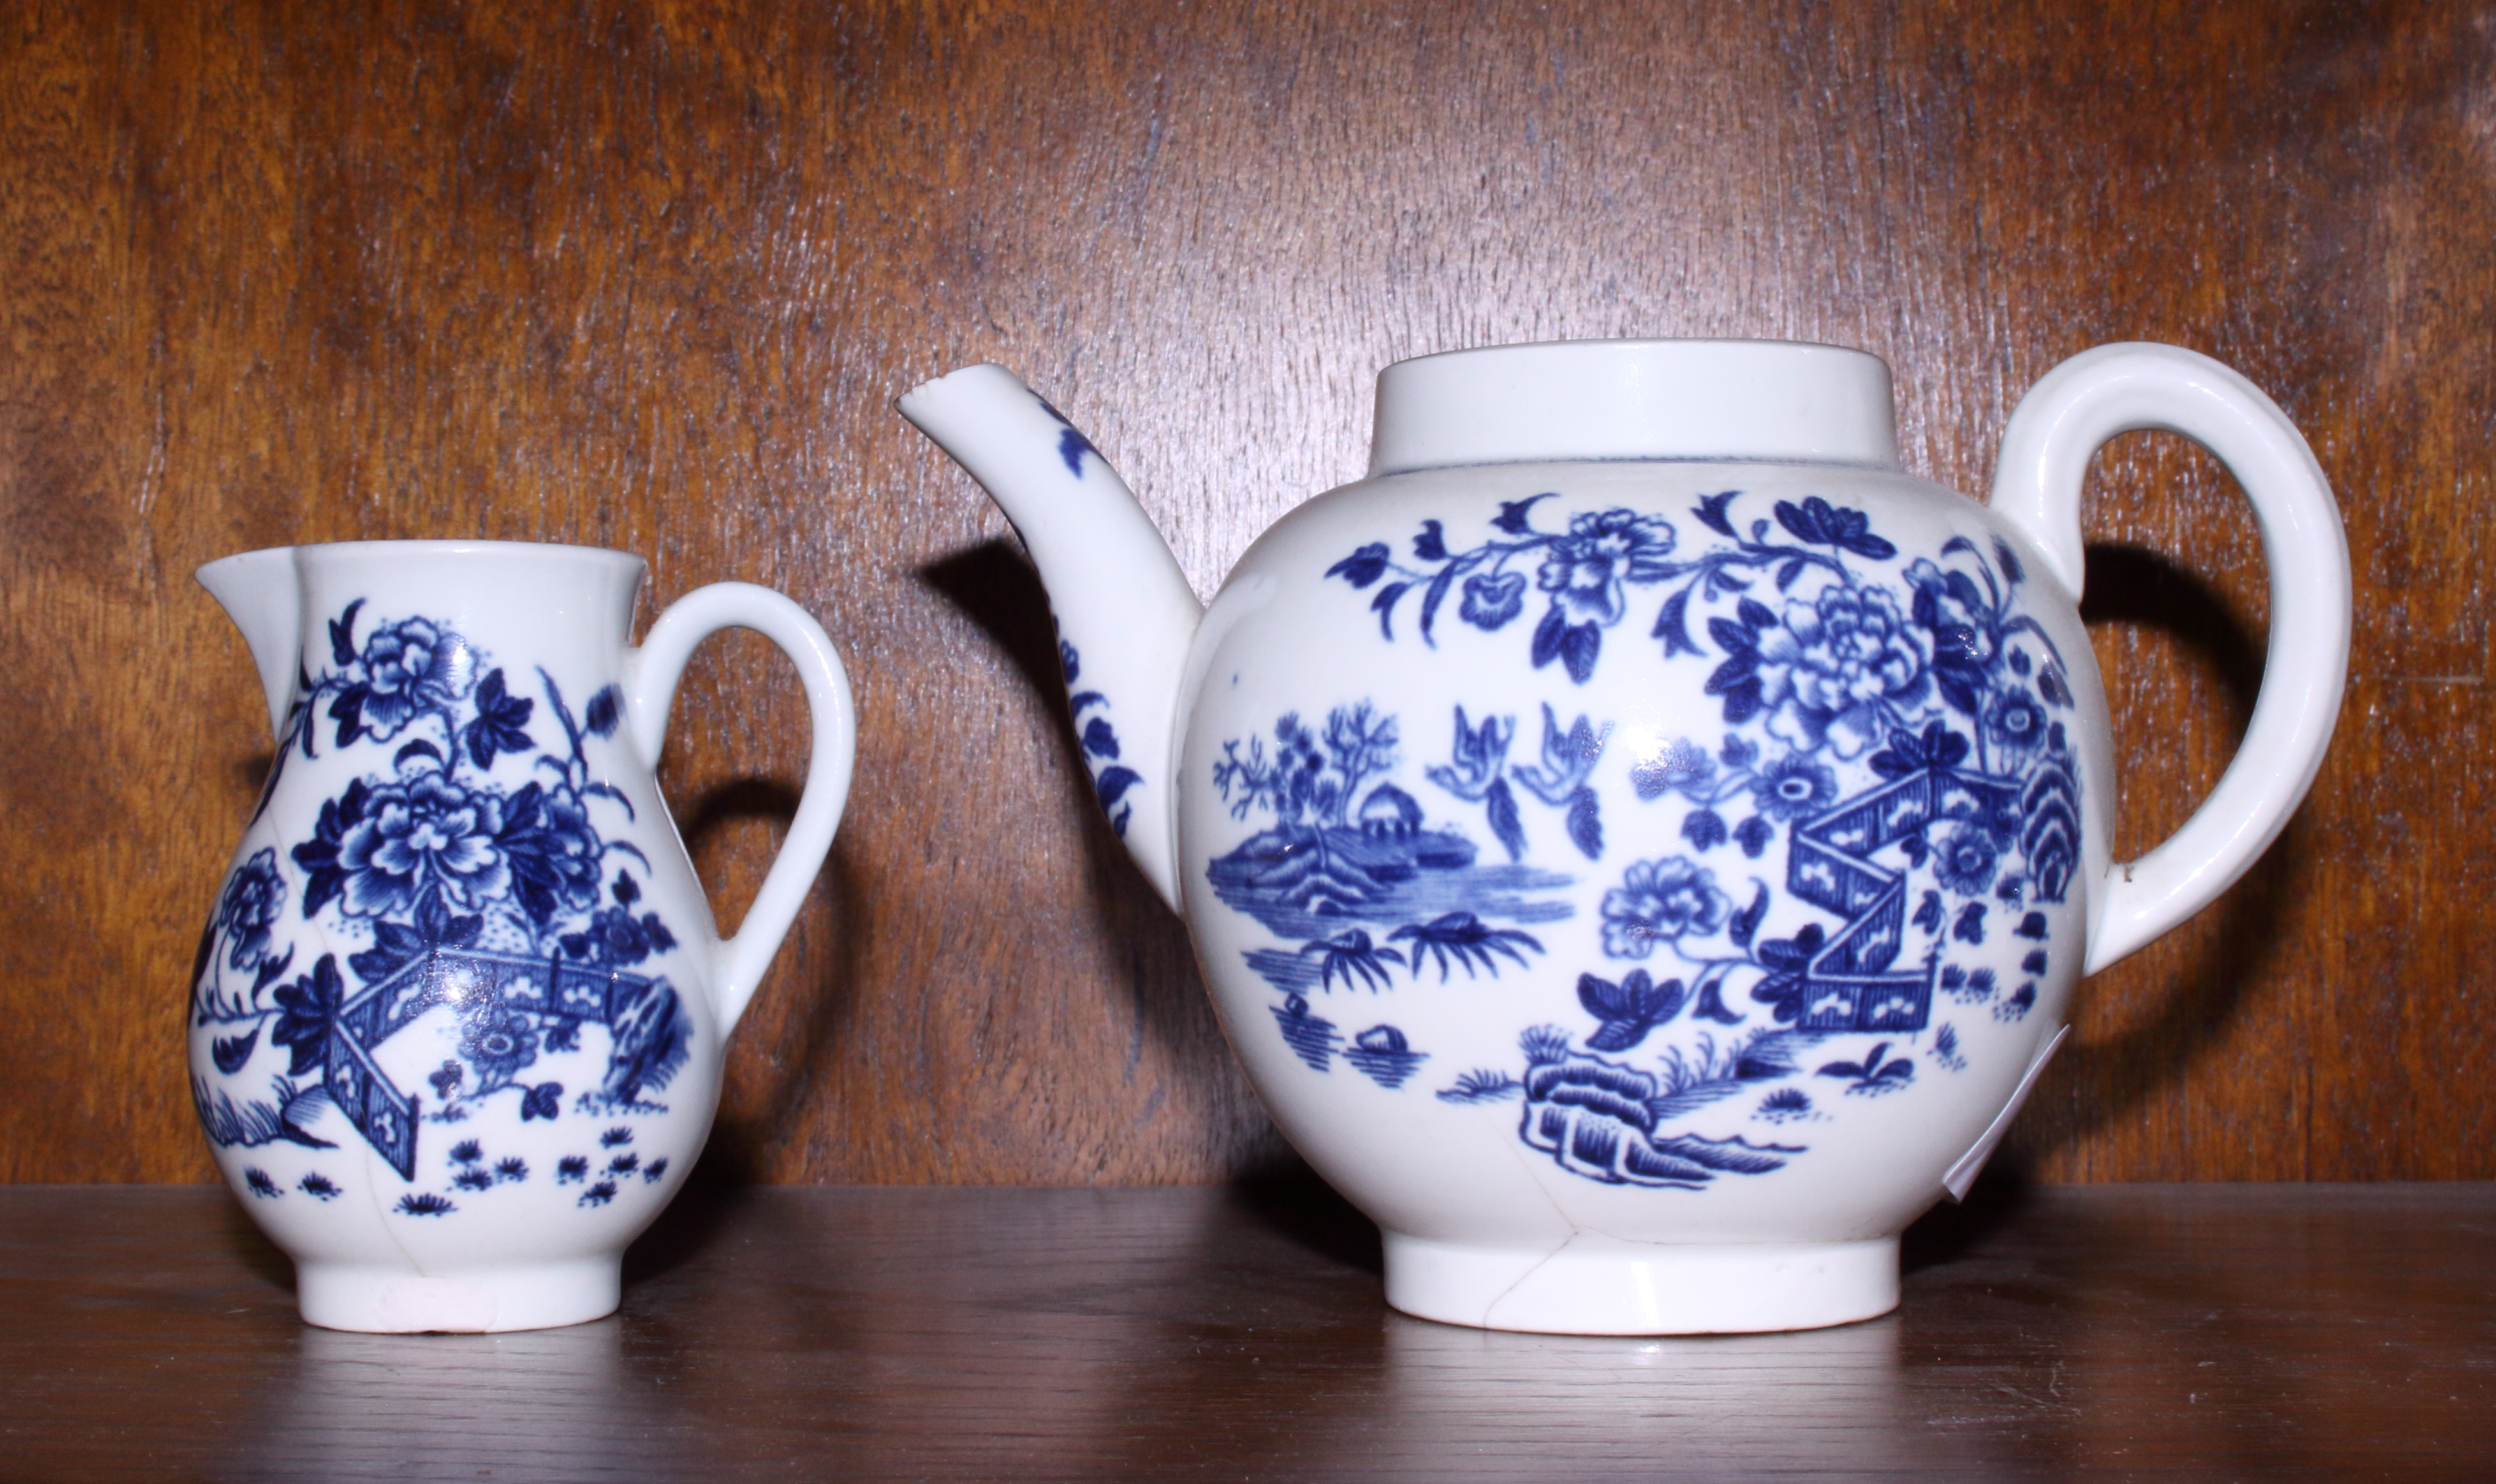 A late 18th century Worcester porcelain "Fence" pattern teapot, 6" high, and a similar milk jug, 3